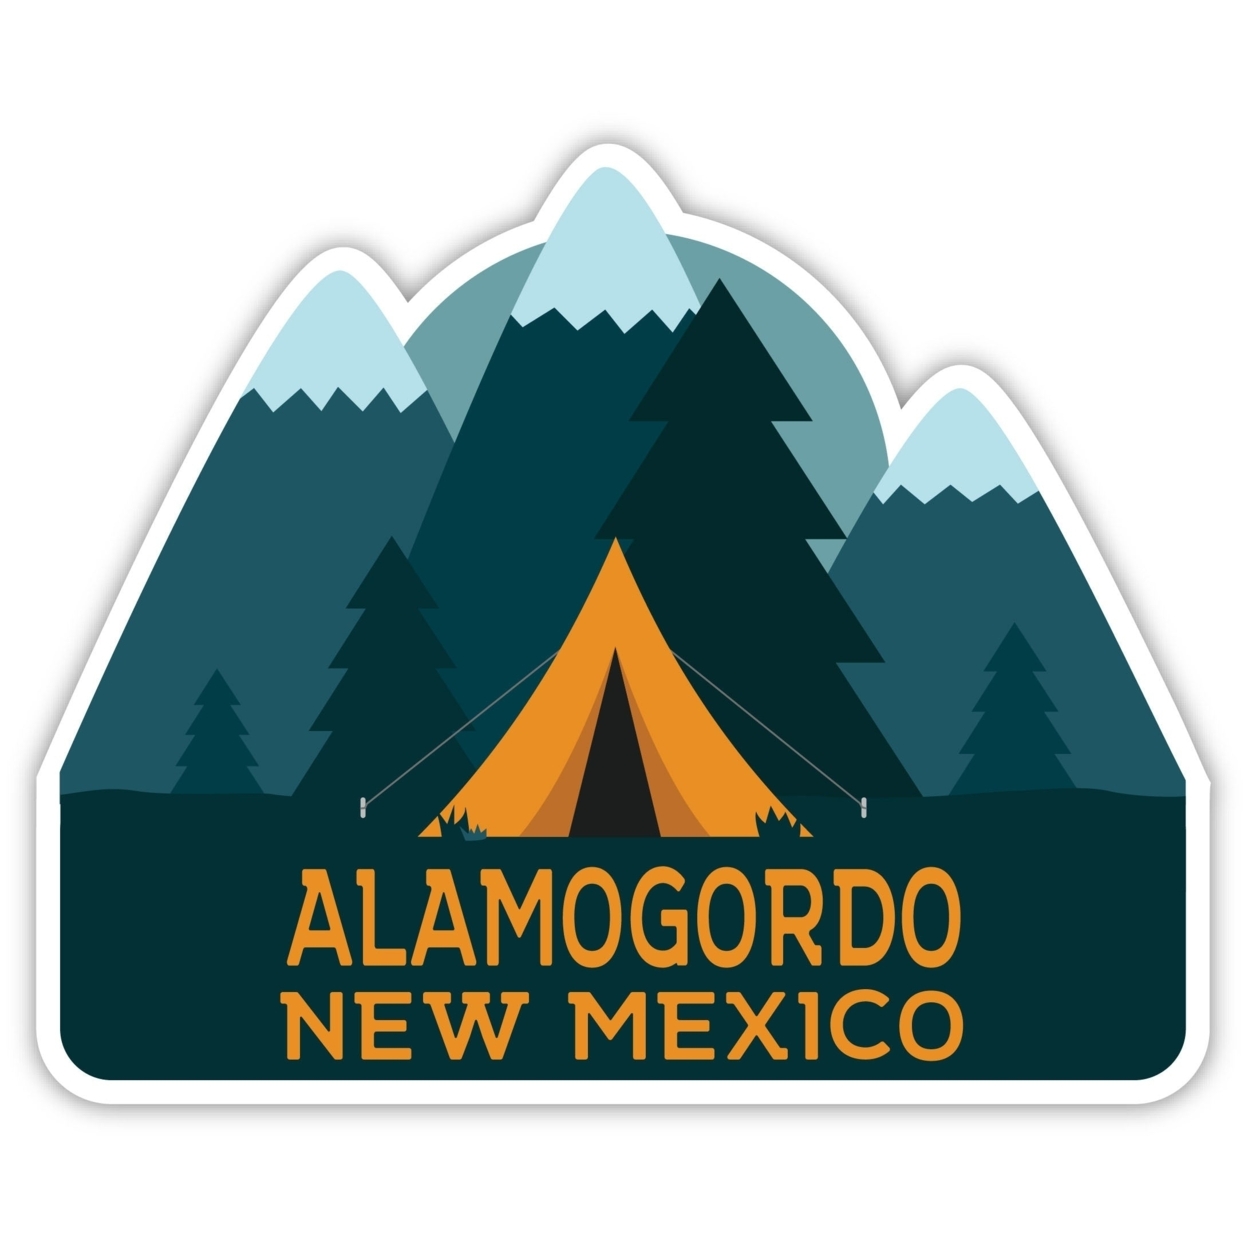 Alamogordo New Mexico Souvenir Decorative Stickers (Choose Theme And Size) - 4-Pack, 12-Inch, Adventures Awaits